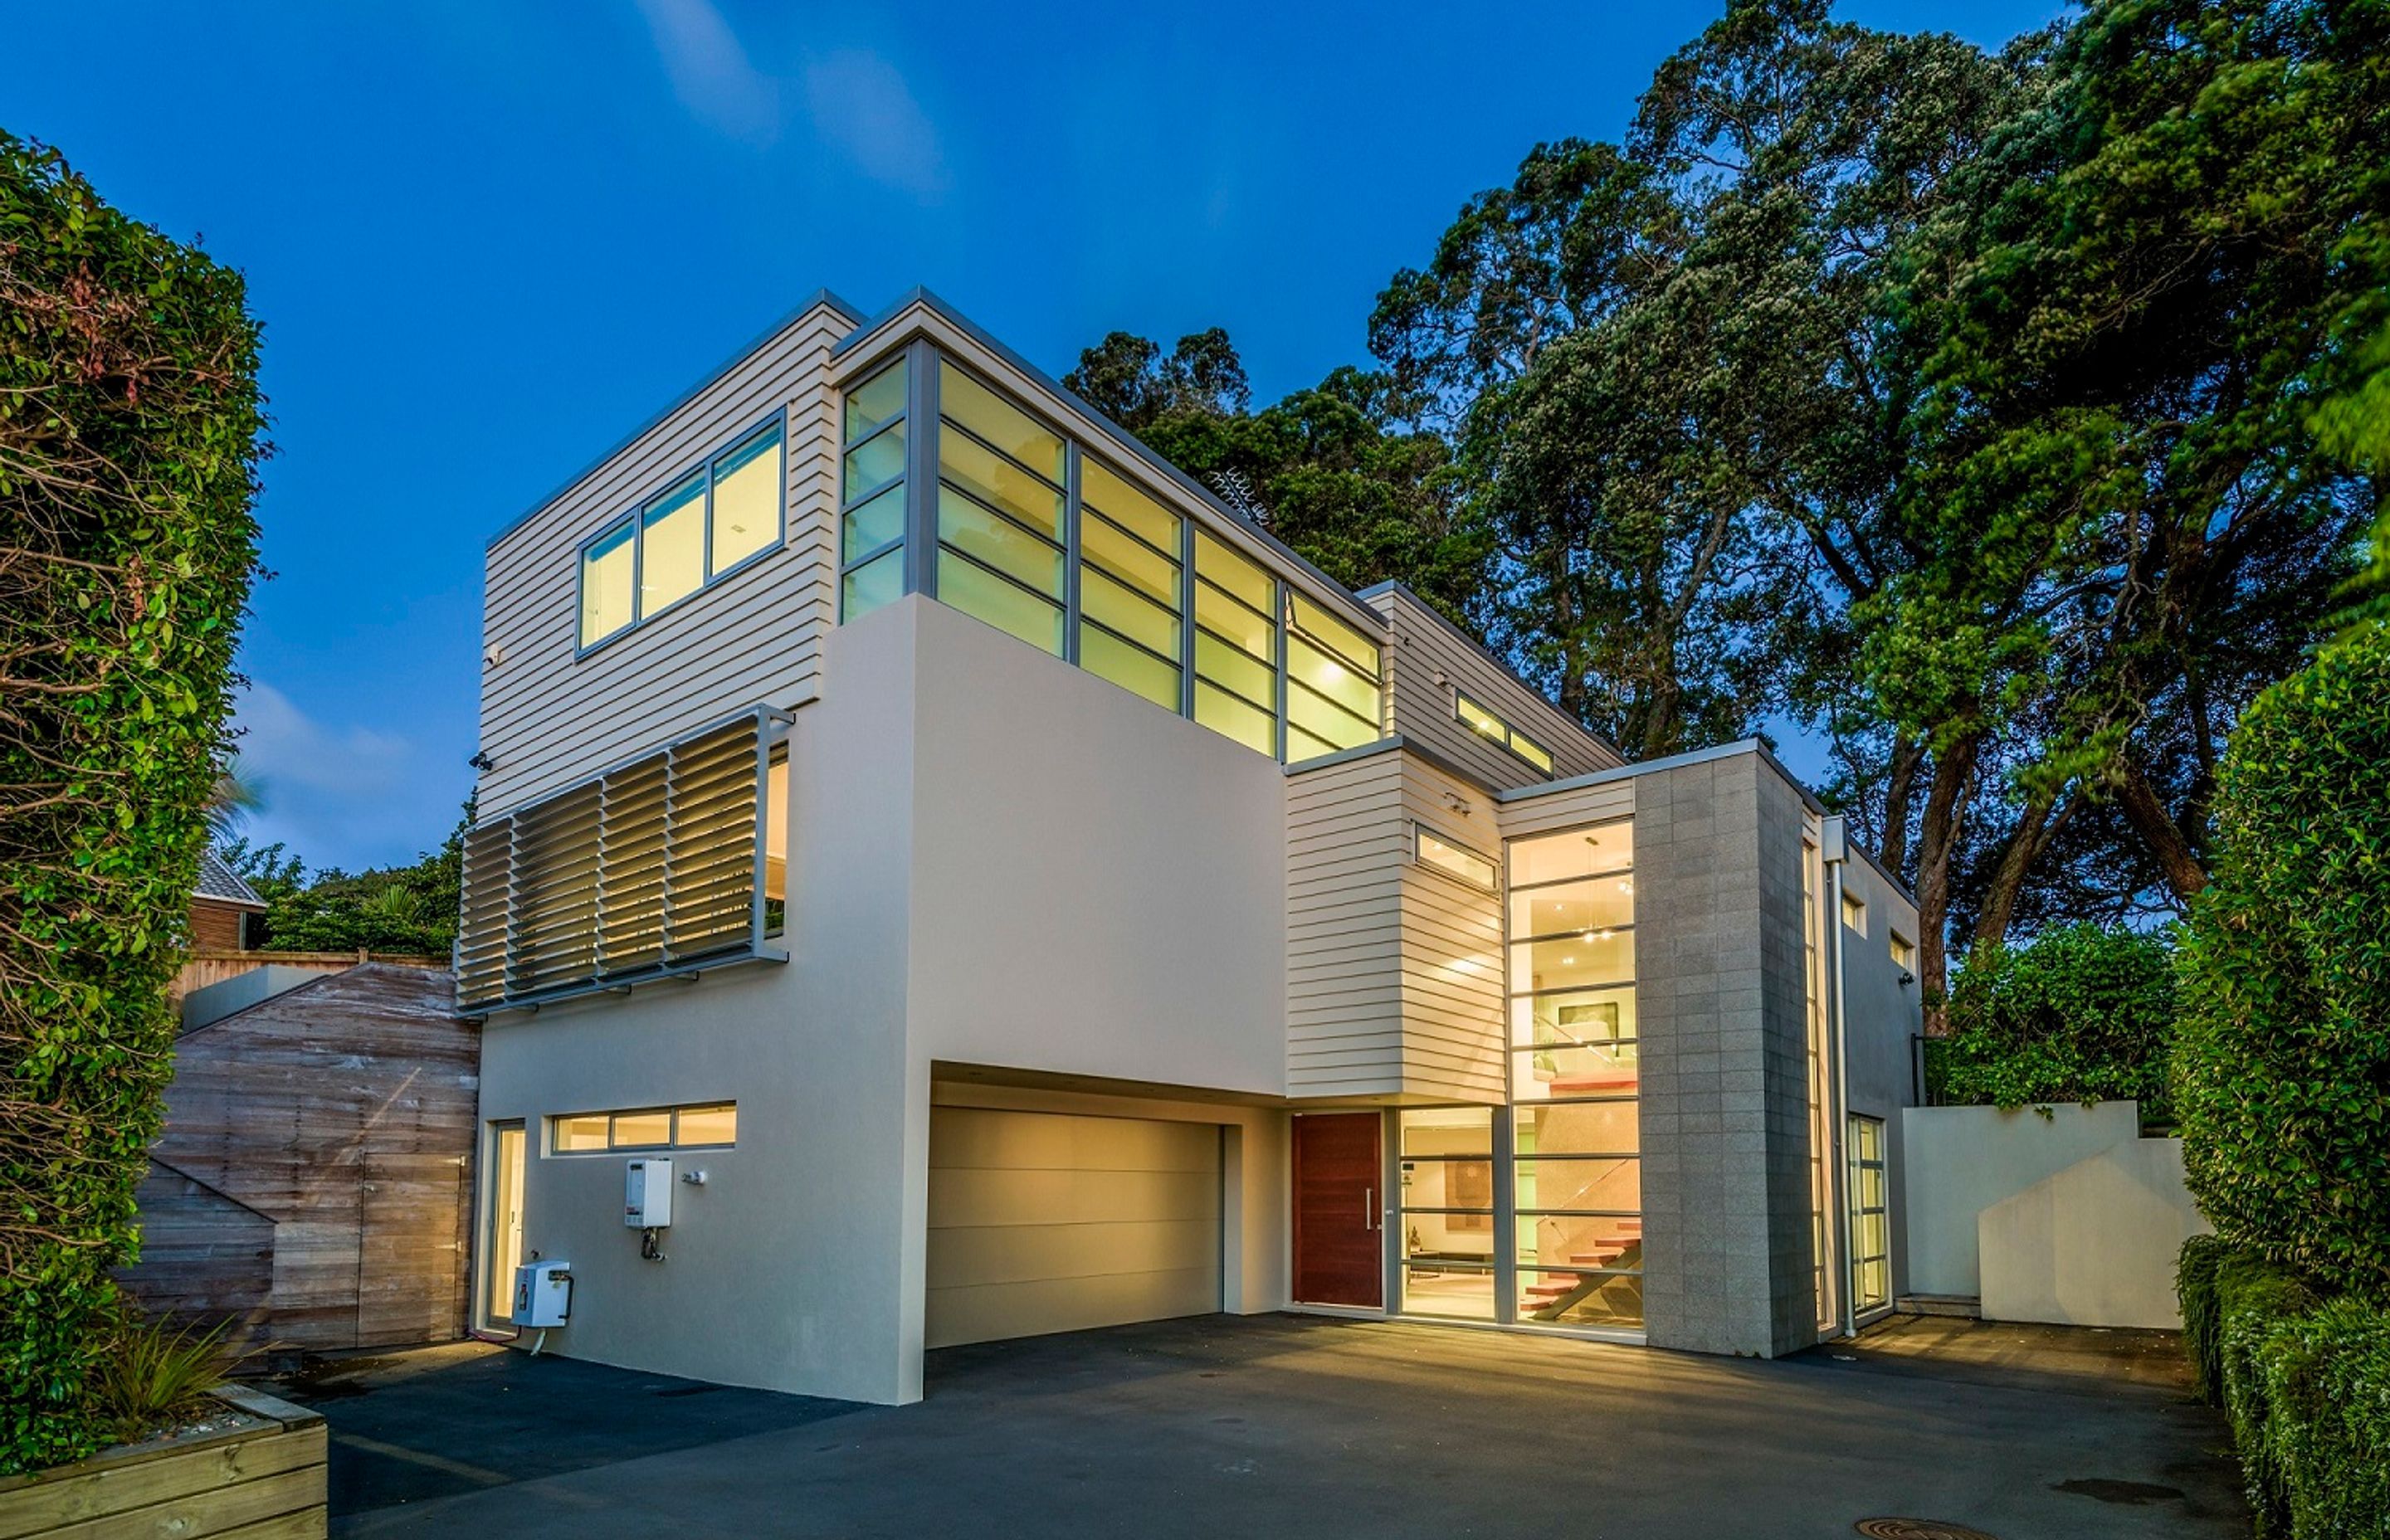 Concrete home still has the wow factor – 10 years on